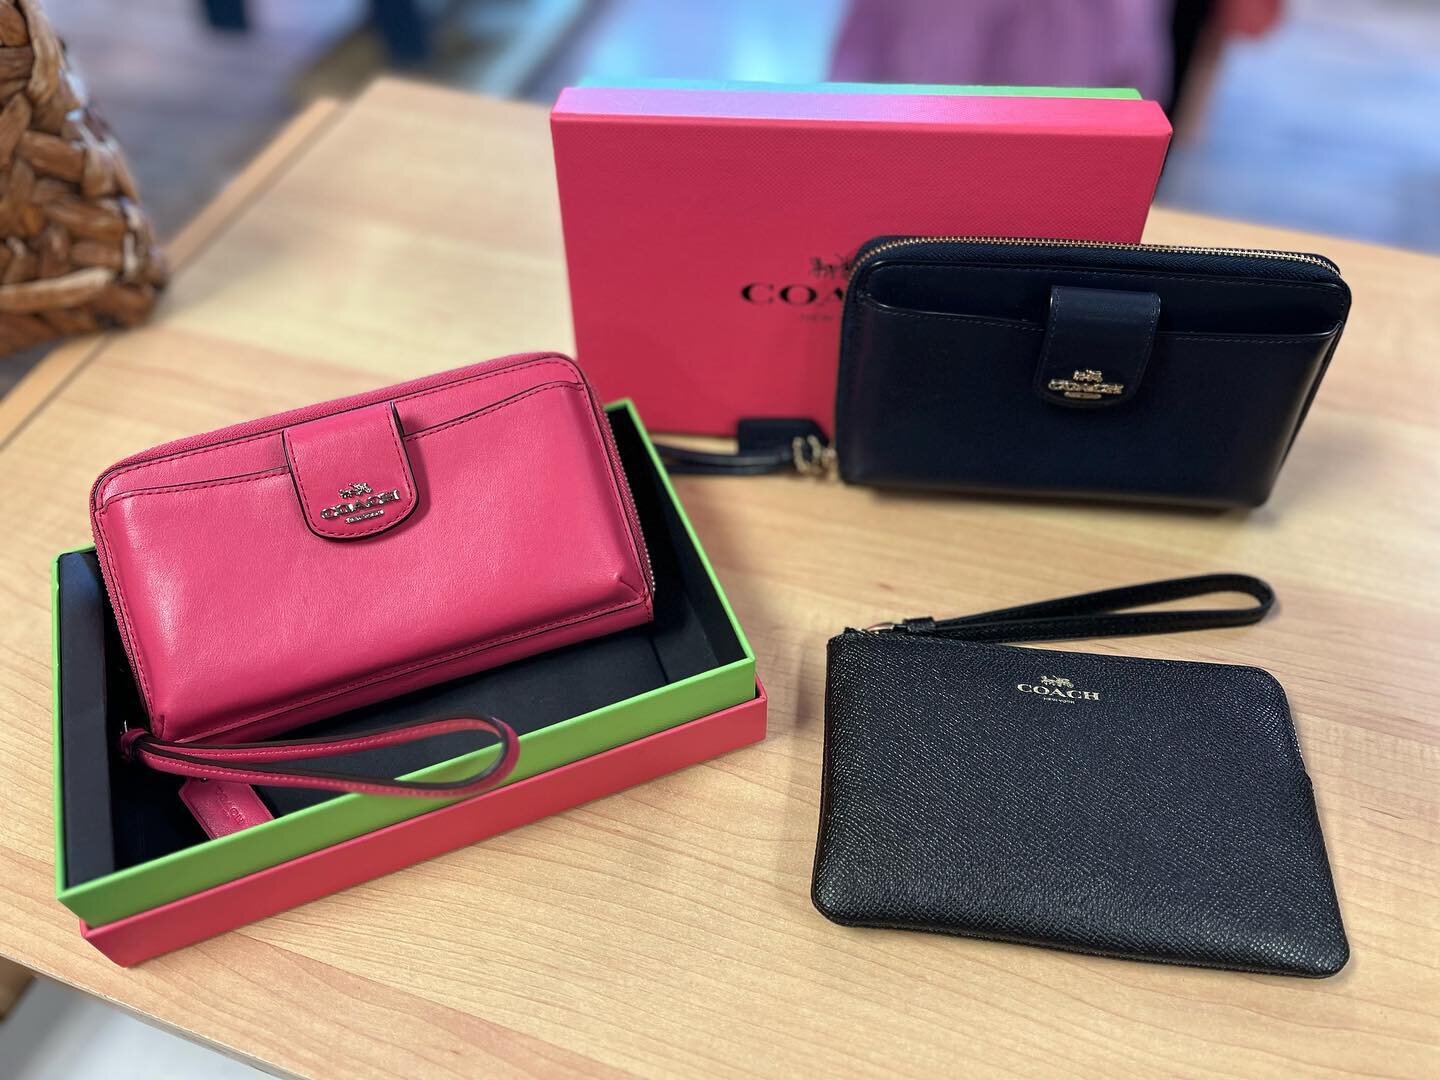 Have you purchased your mom&rsquo;s ❤️ day gift yet??? Wallets by COACH in pink and navy $39 each and black wristlet $29. 
.
.
.
#uptownattic #designerconsignment #consignment #consignmentboutique #coach #coachhandbag #wallets #thrifting #hudsonvalle